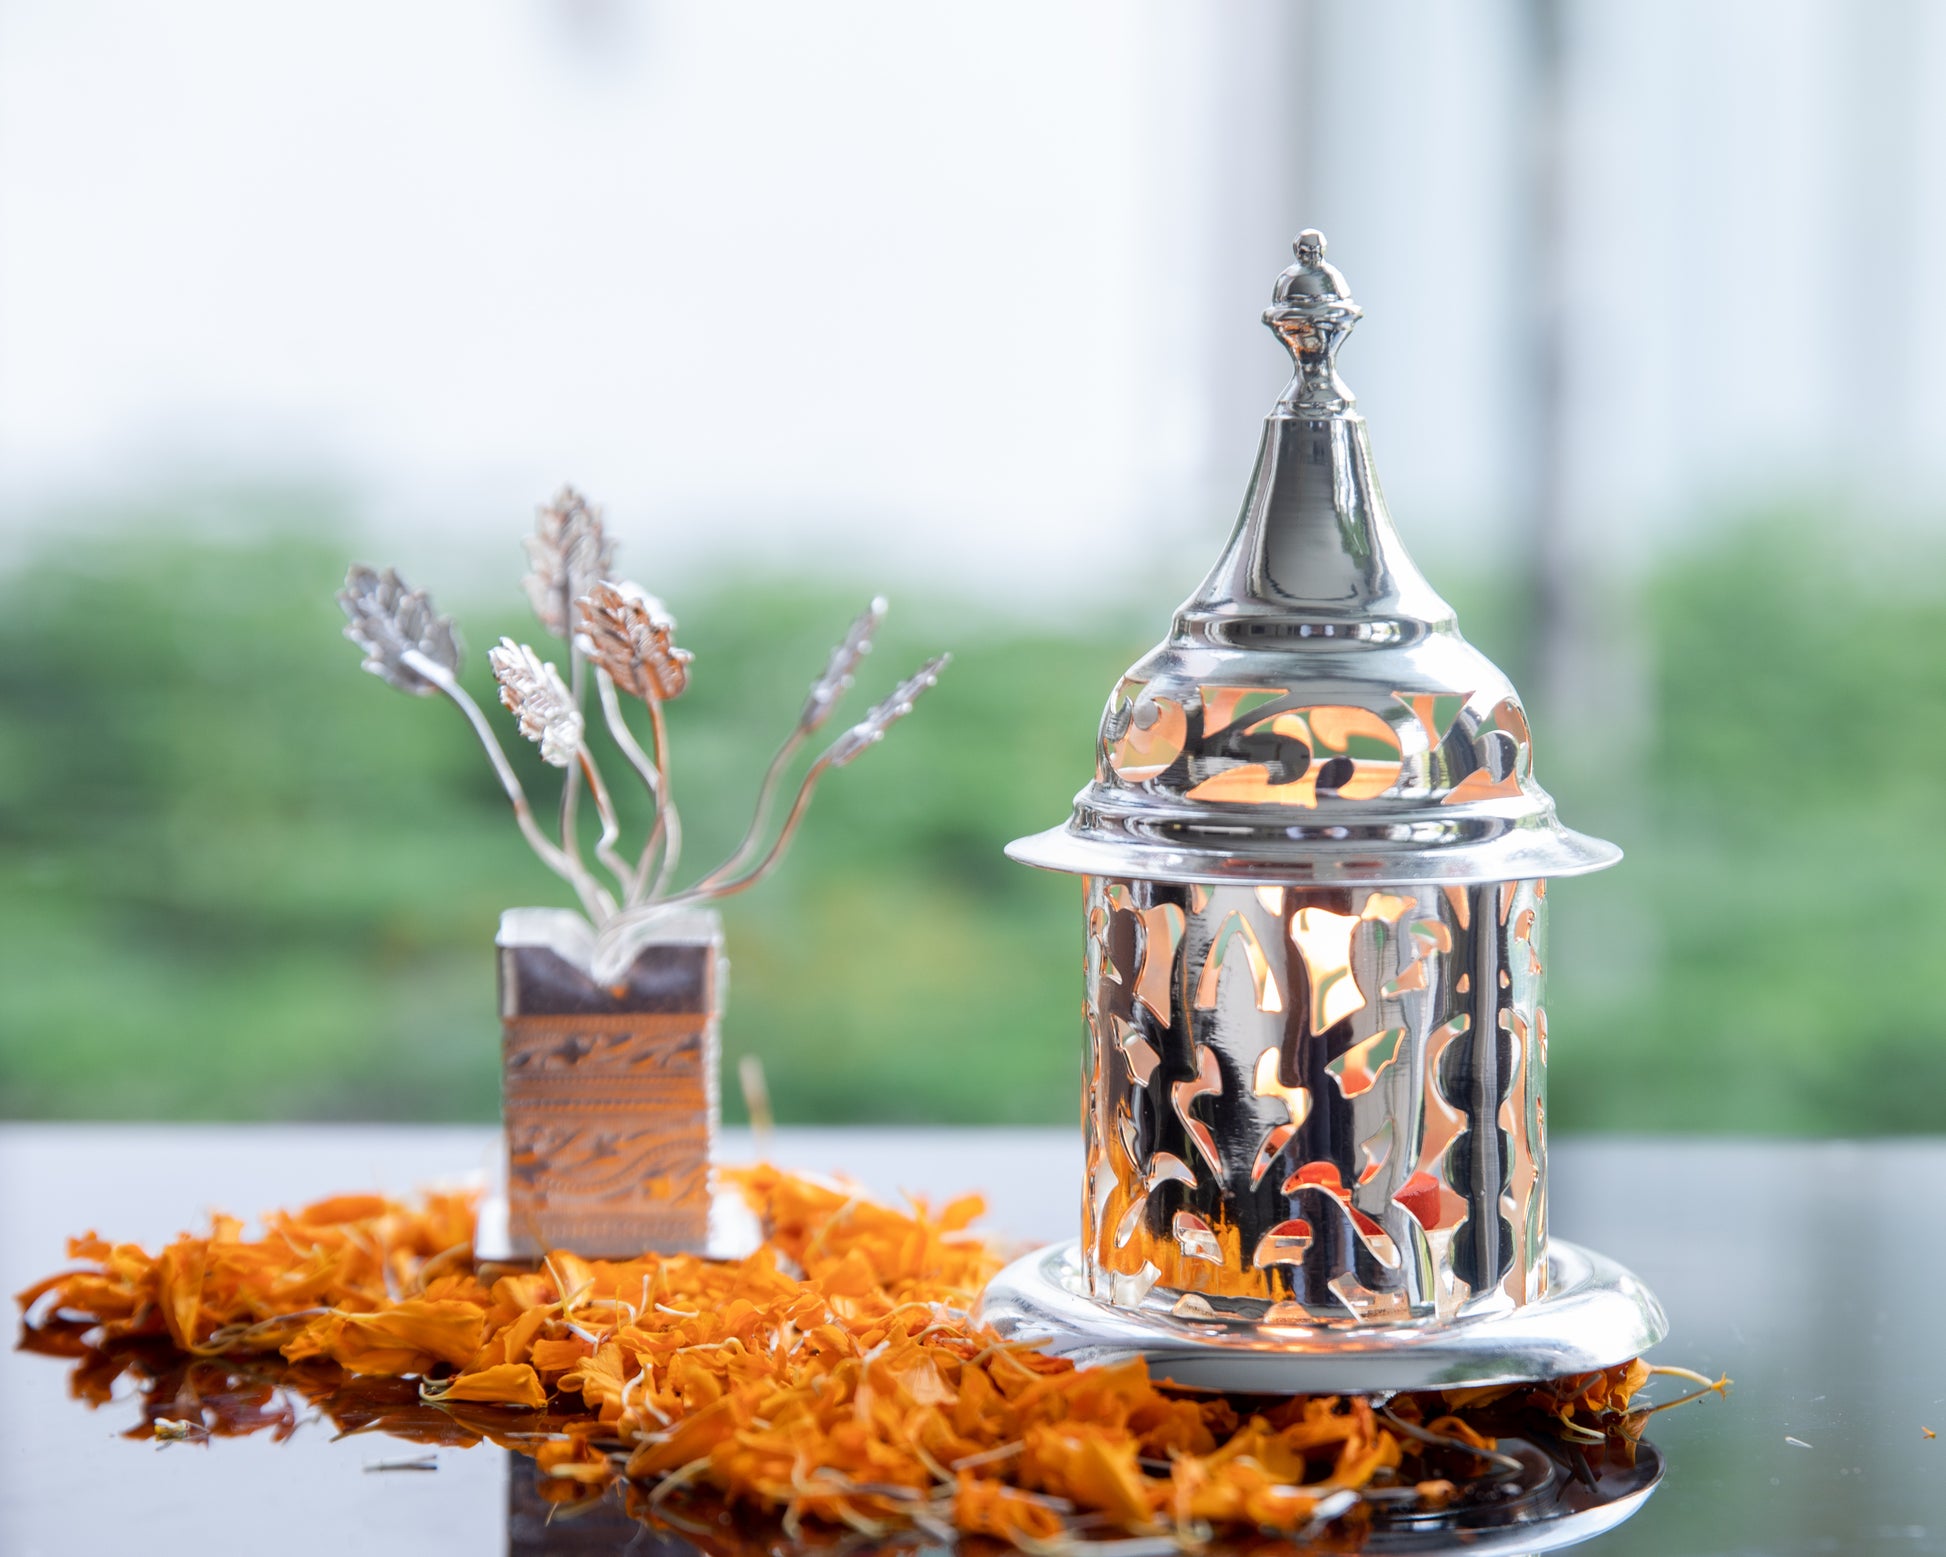  Akhand Diya with Jaali design, characterised by intricate patterns 